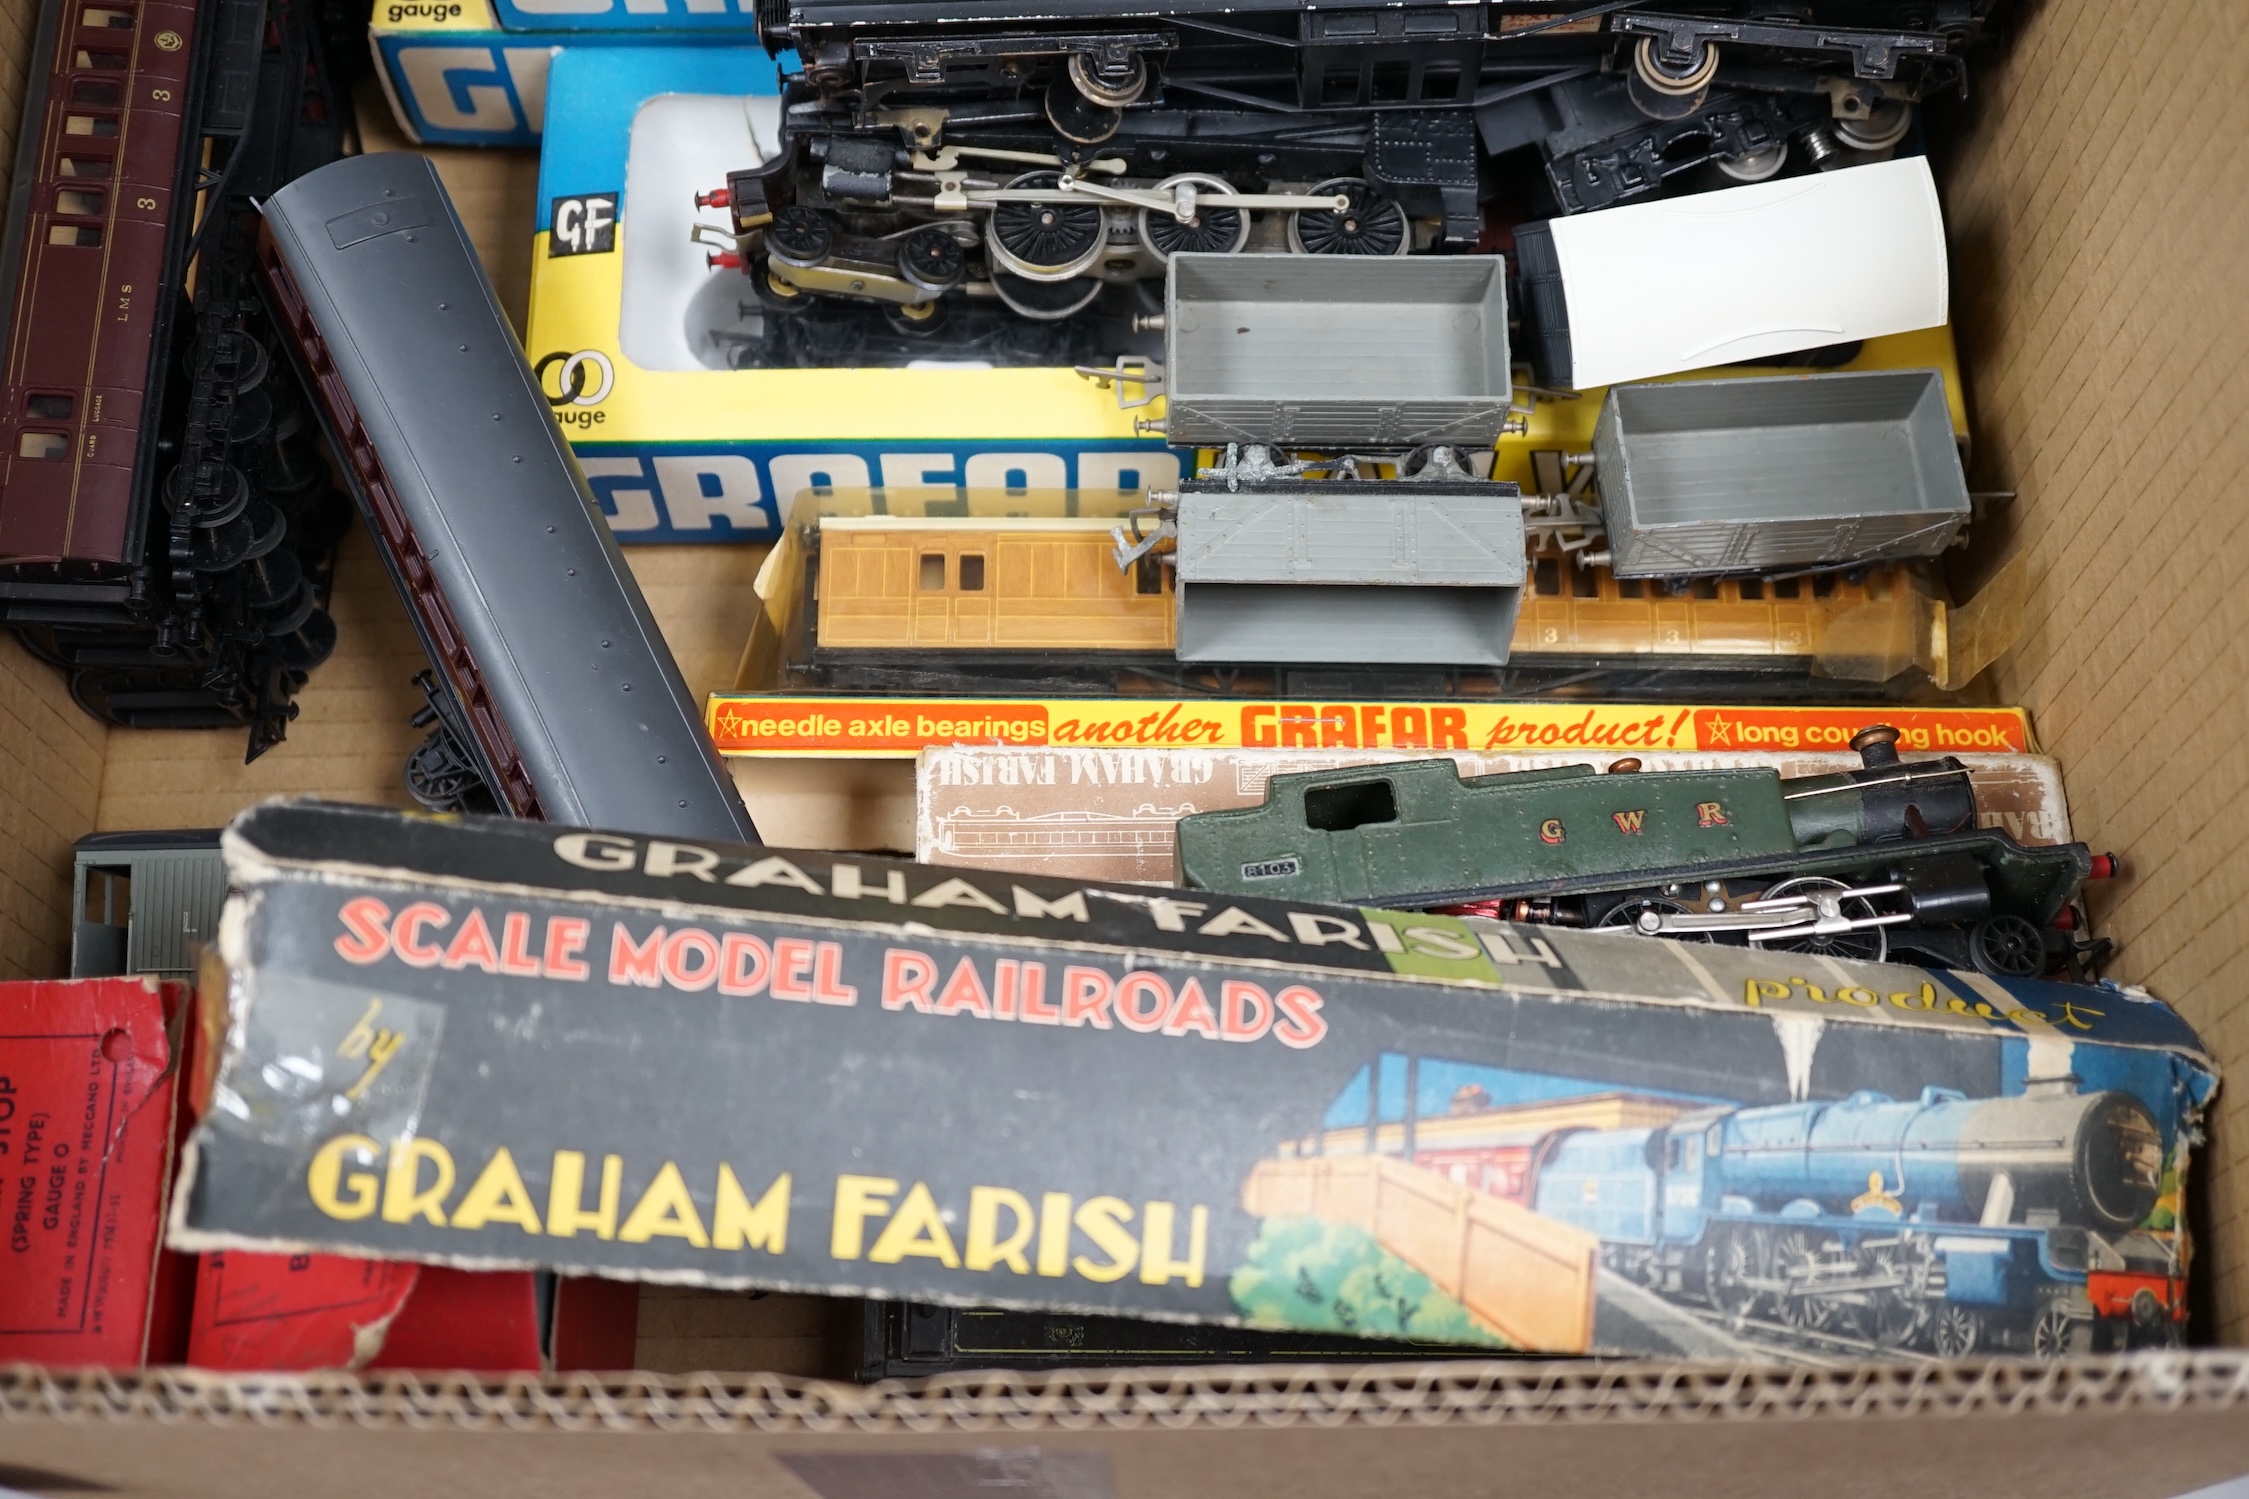 A collection of 00 gauge model Railway by Graham Farish, Exley, etc. including two locomotives; a GWR Prairie Tank loco, plus the remains of another, and a BR Class 5 4-6-0 tender loco, two boxed Pullman cars, freight wa